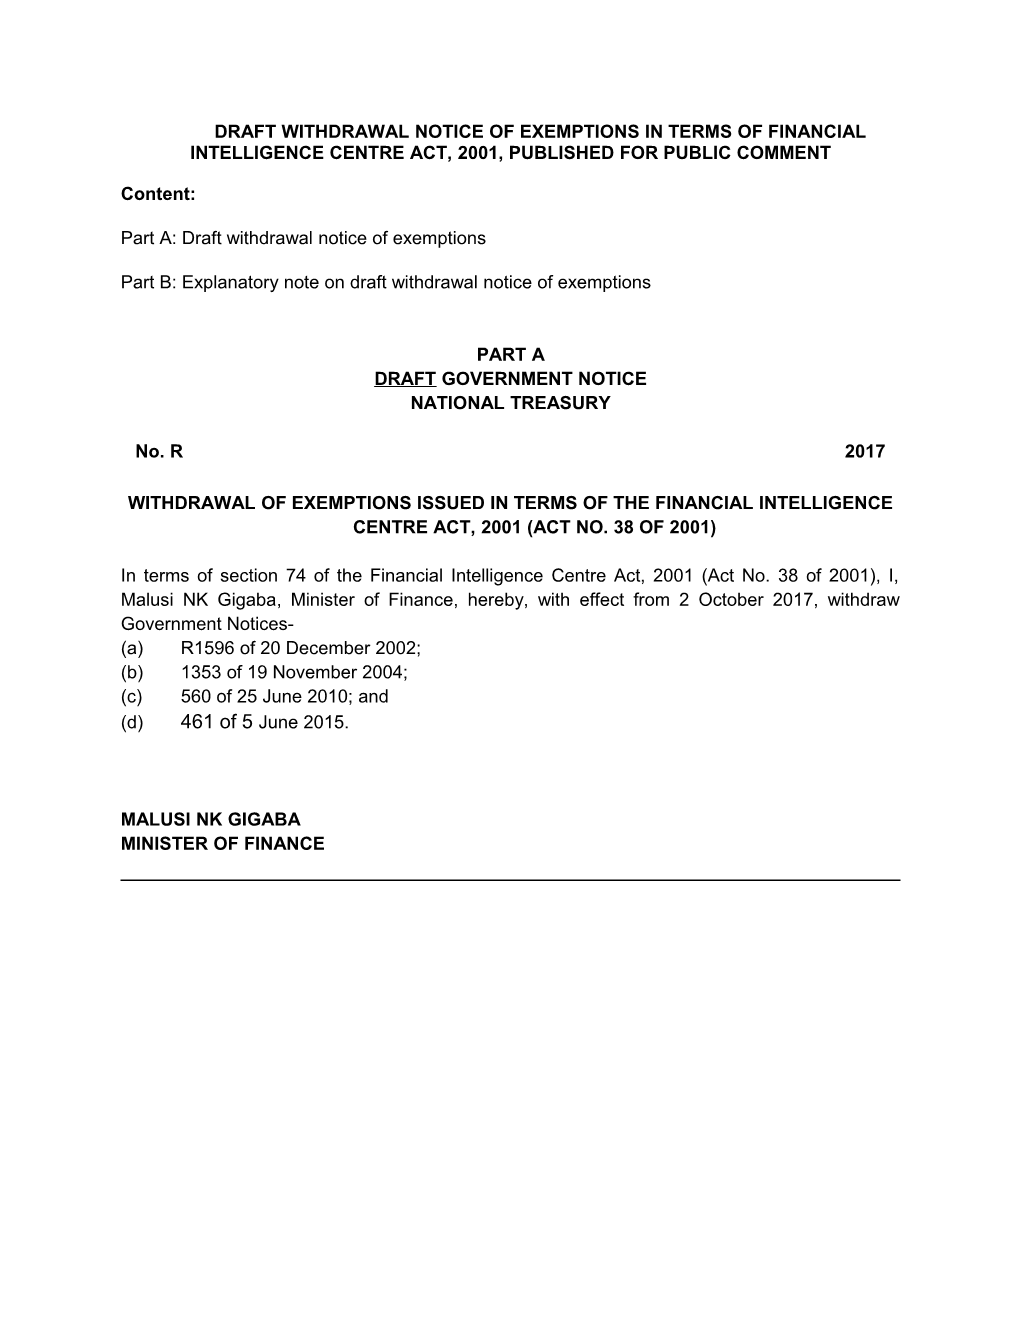 Draft Withdrawal Notice of Exemptions